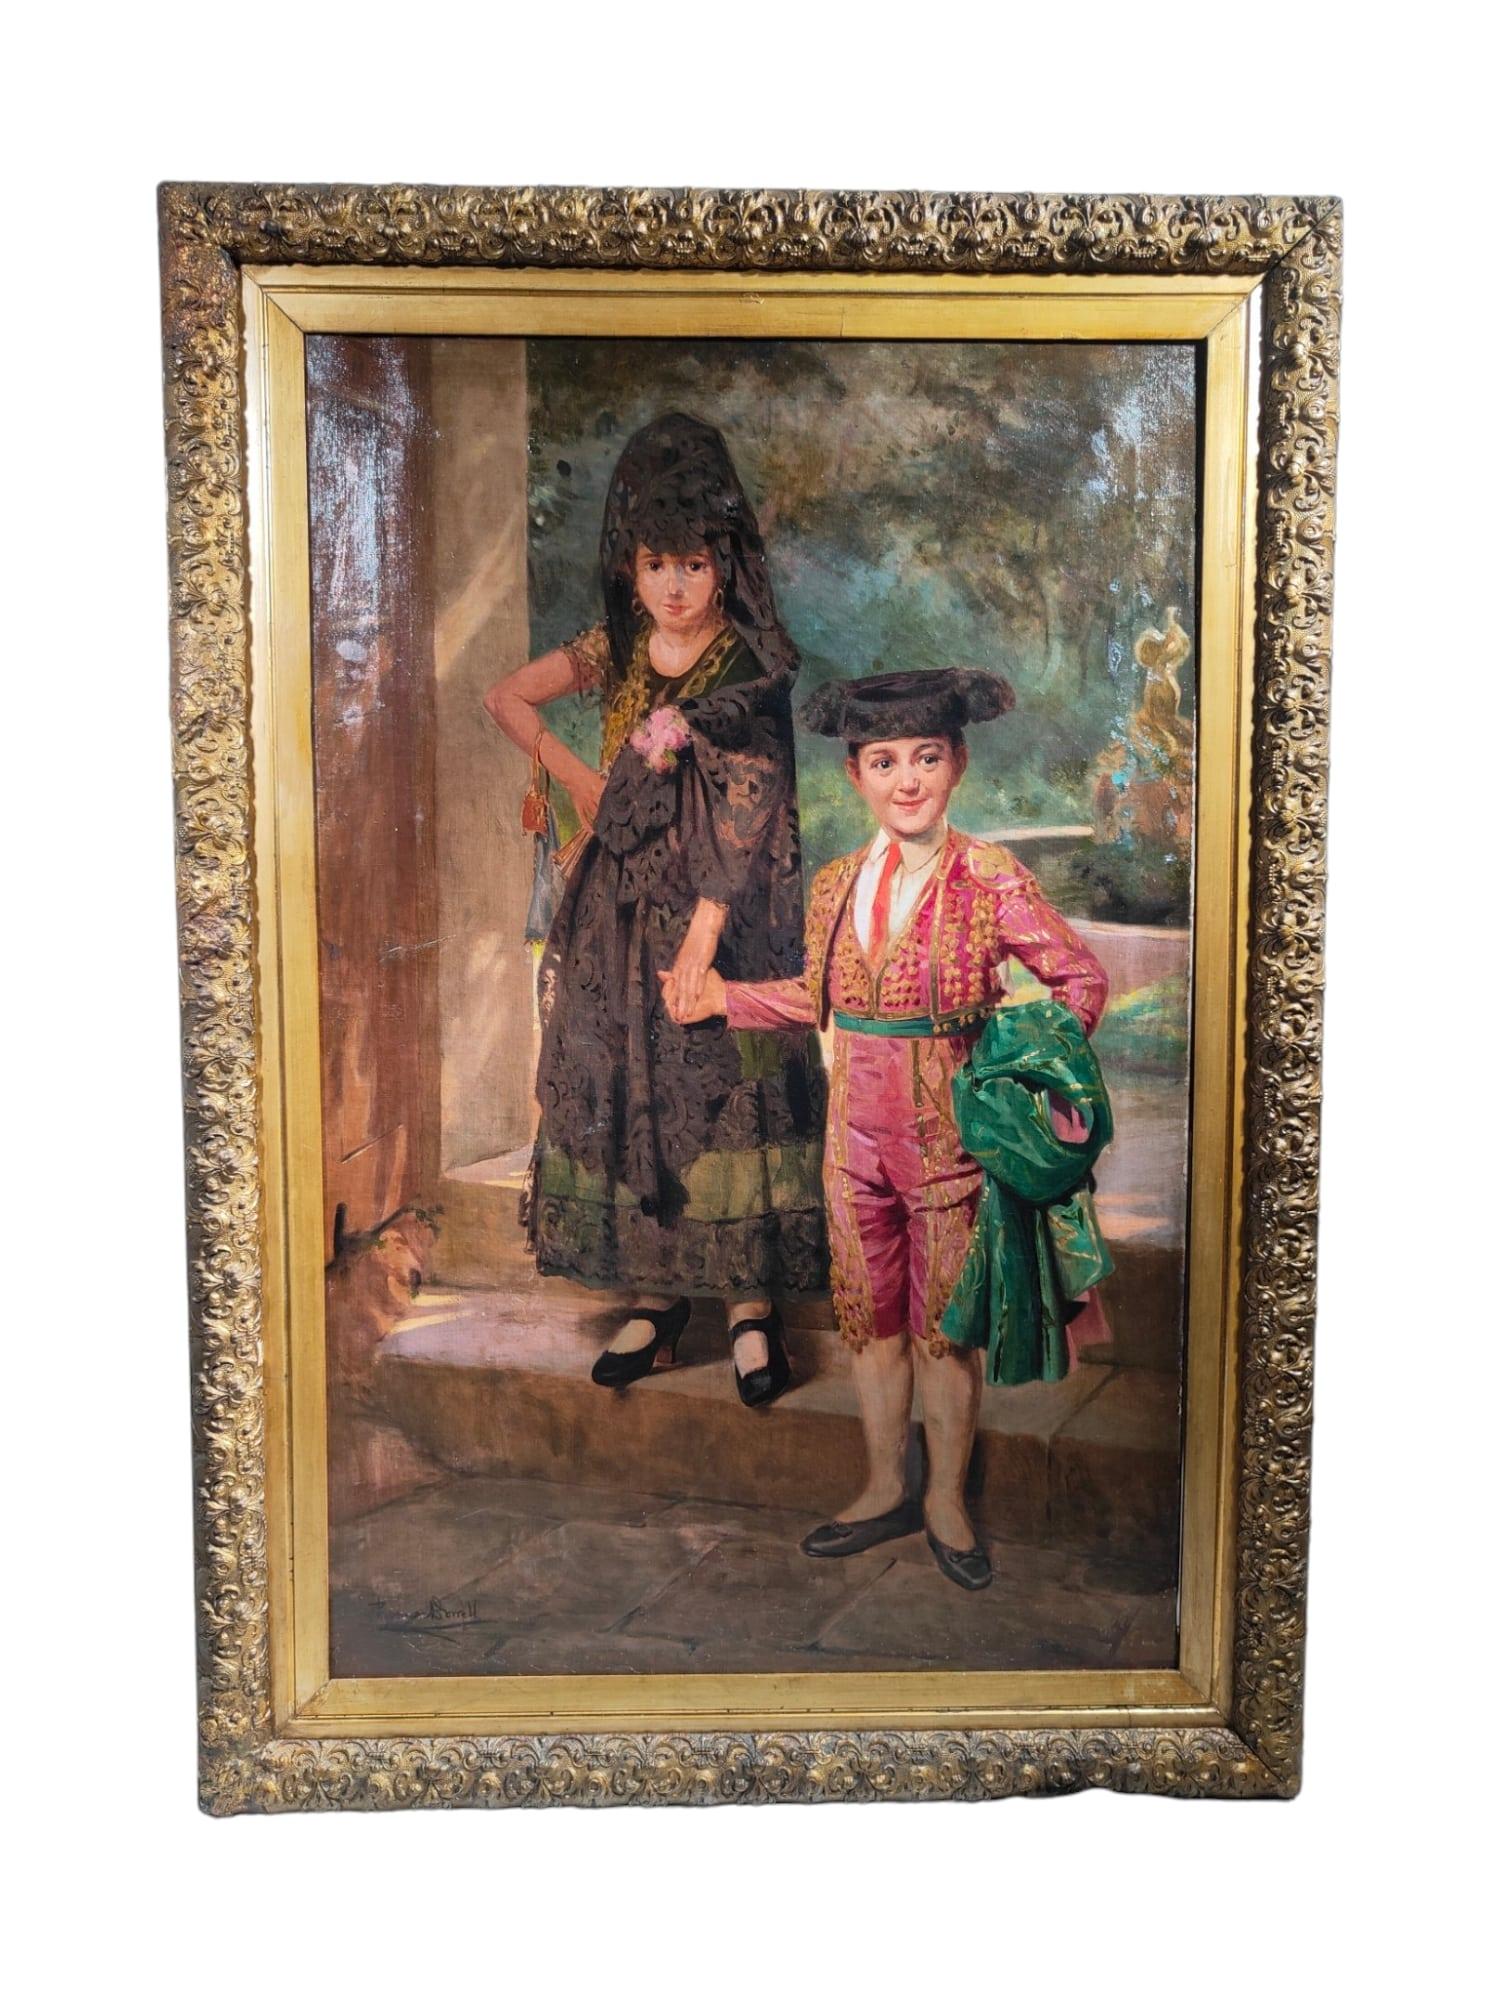 Discover the fascination of bullfighting through this captivating painting featuring a child dressed as a torero, an artistic gem from the late 19th century. This artwork, hailing from the esteemed Spanish School of the 19th century, is a curious